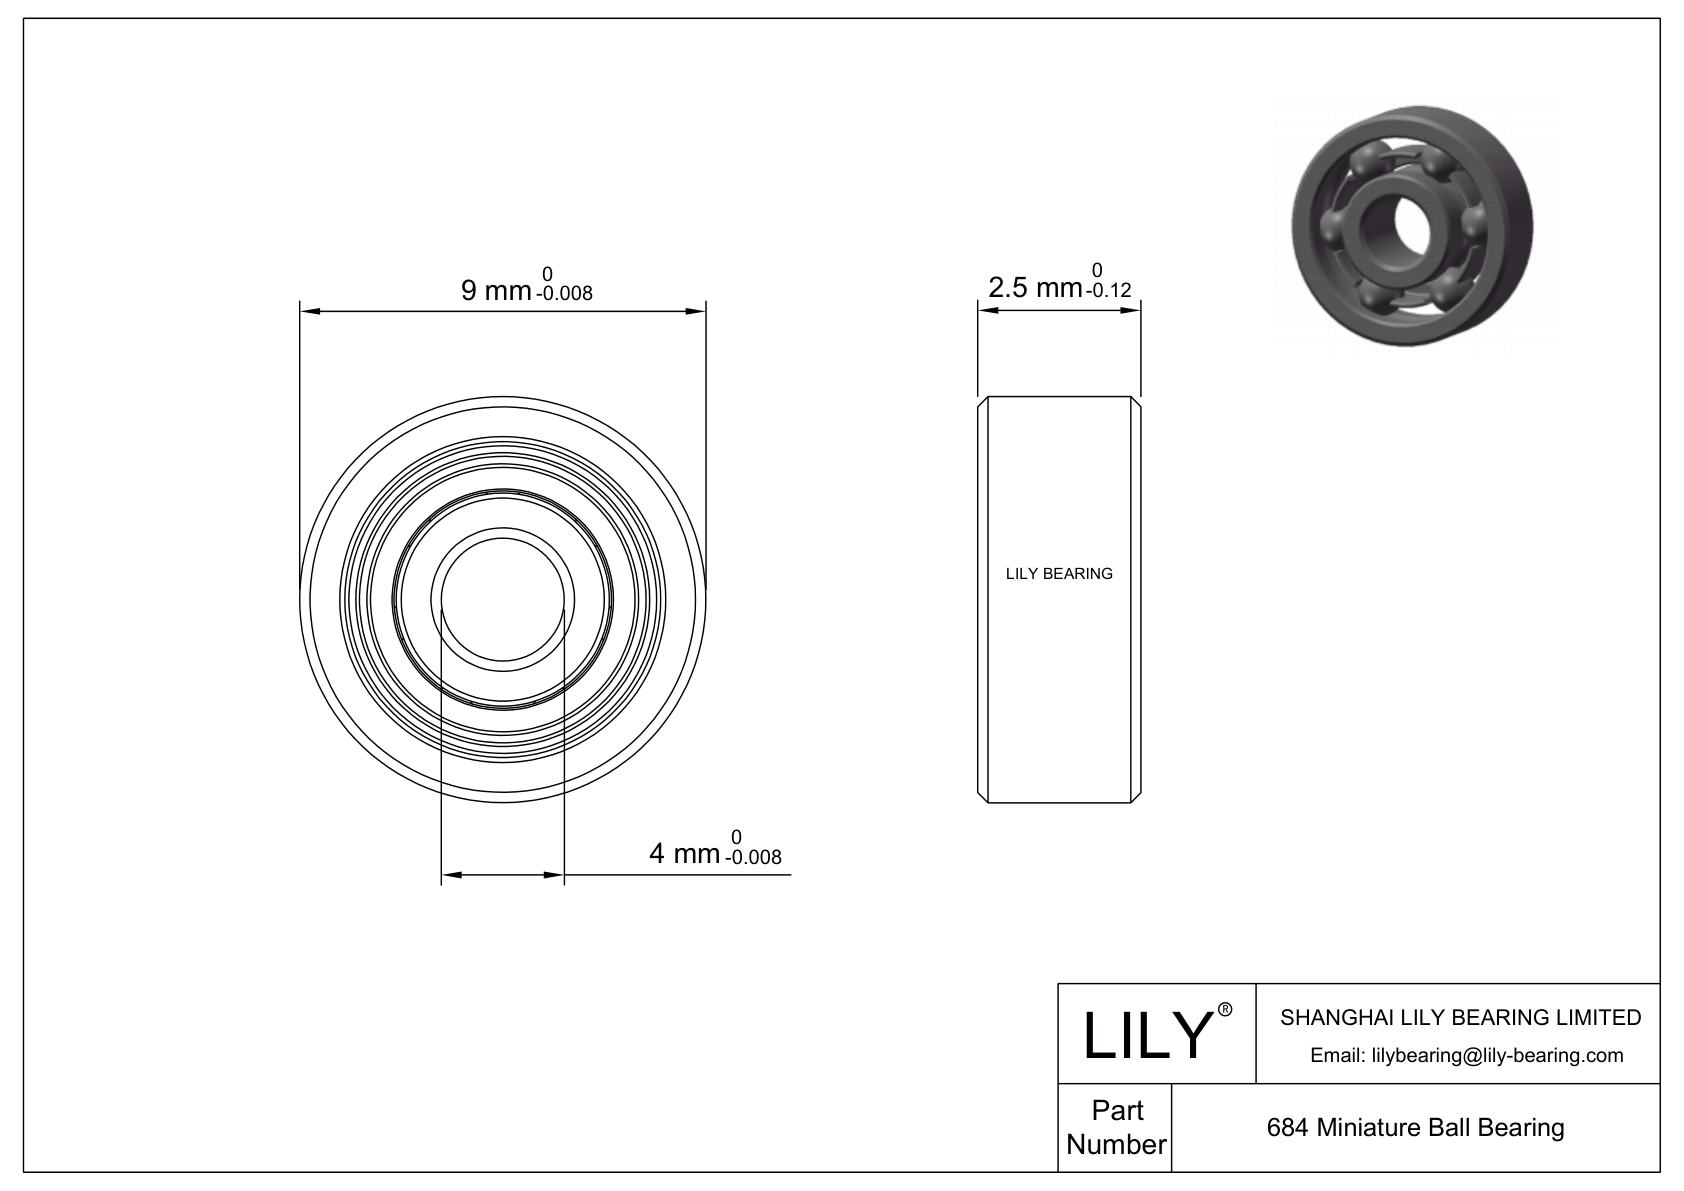 LILY-BS68413-8 POM Coated Bearing cad drawing